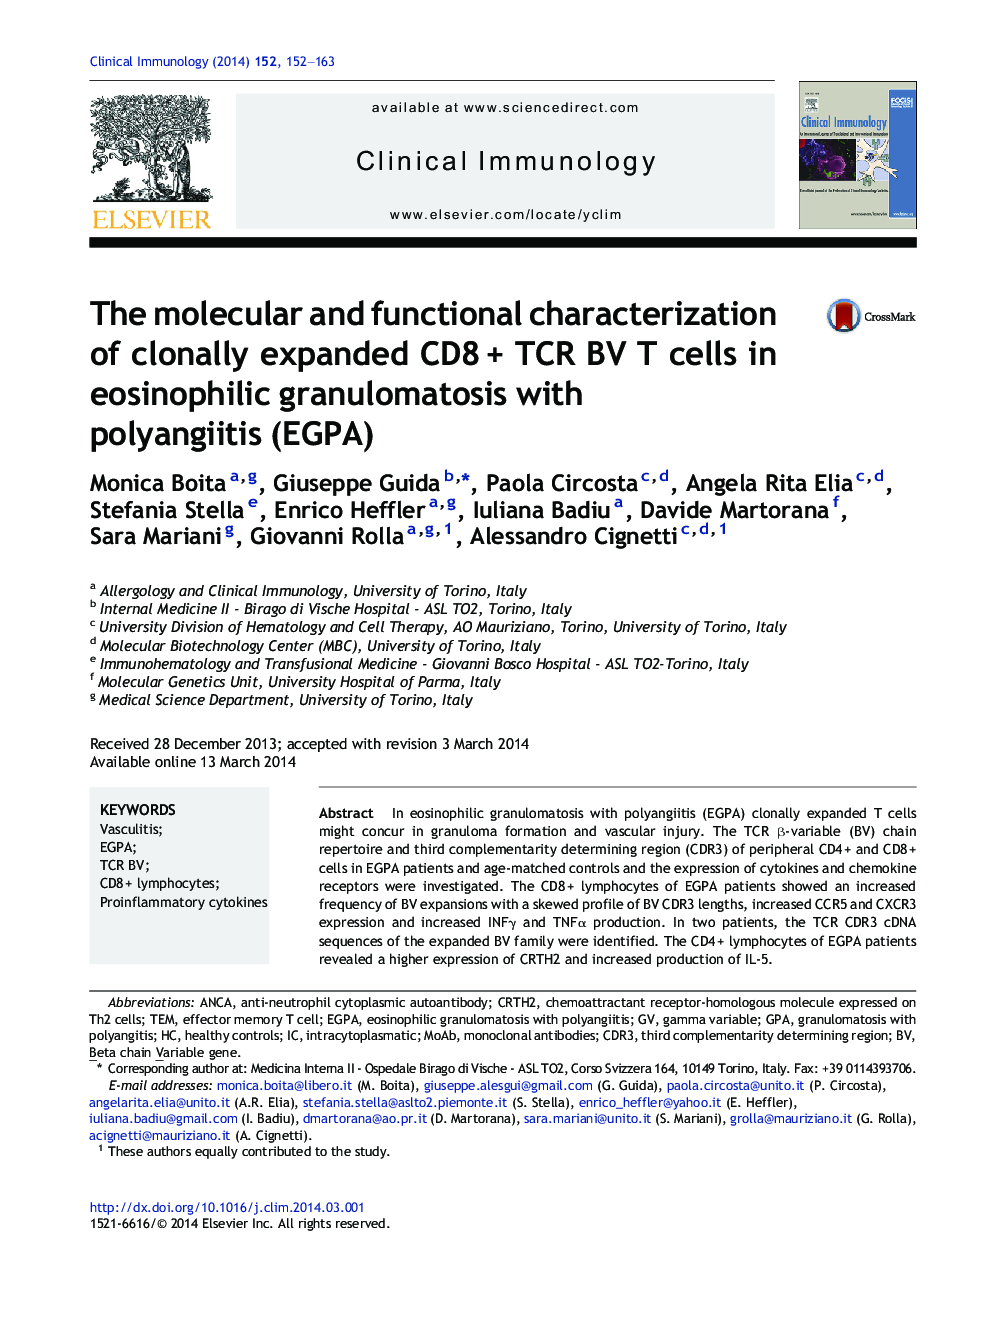 The molecular and functional characterization of clonally expanded CD8Â + TCR BV T cells in eosinophilic granulomatosis with polyangiitis (EGPA)